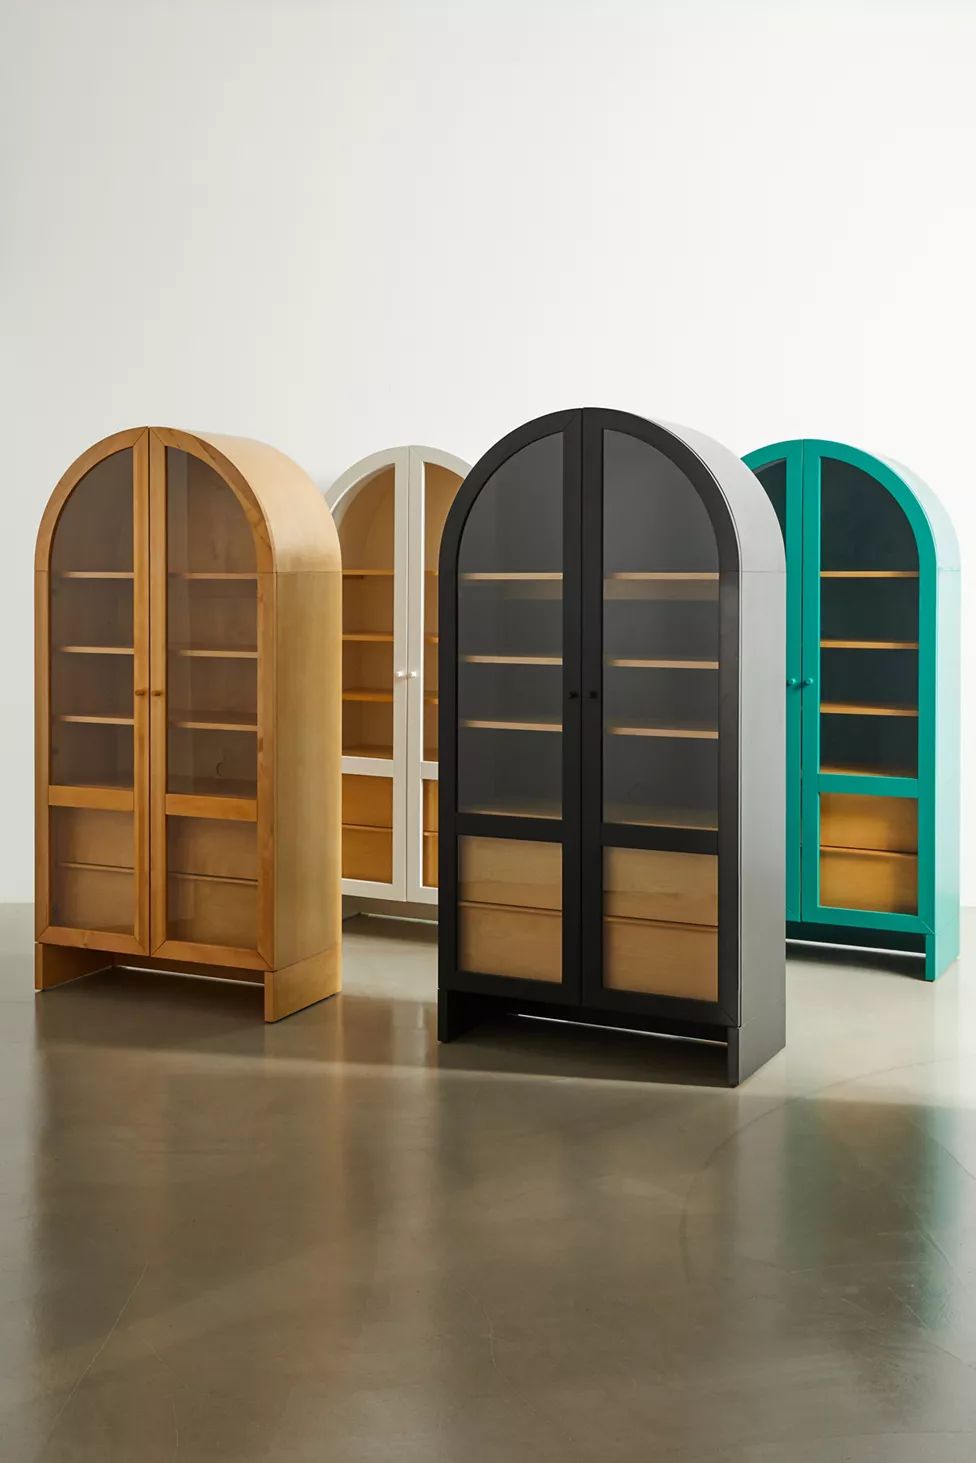 You May Also Like

              
            Mason Cane Storage Cabinet
            
           ... | Urban Outfitters (US and RoW)